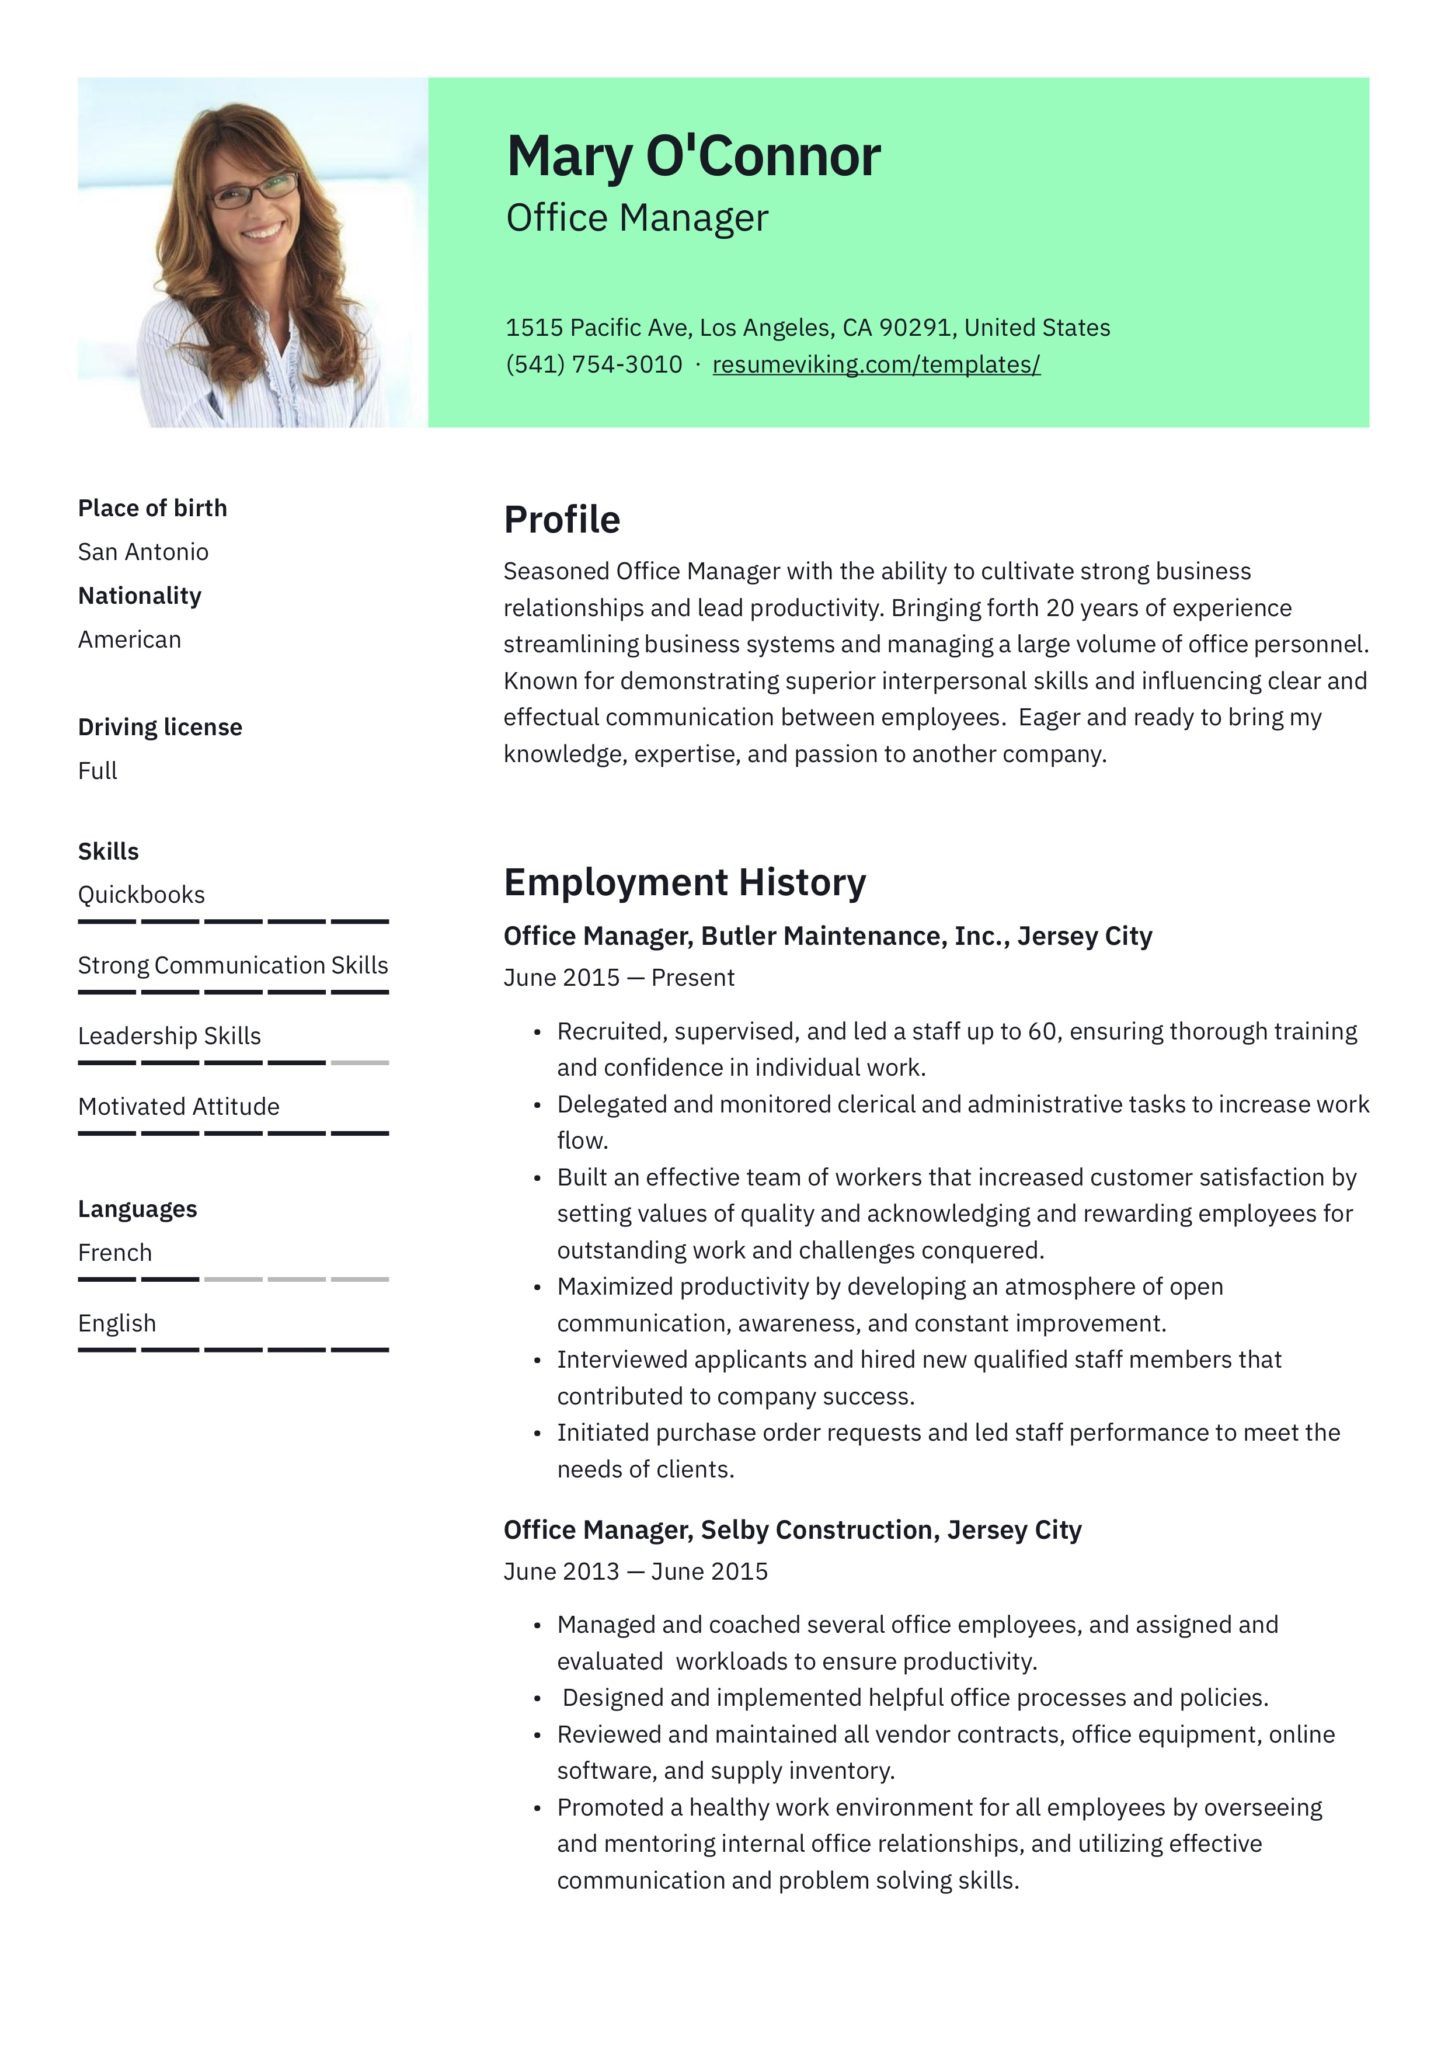 Law Firm Office Manager Resume Sample Office Manager Resume & Guide 12 Samples Pdf 2020